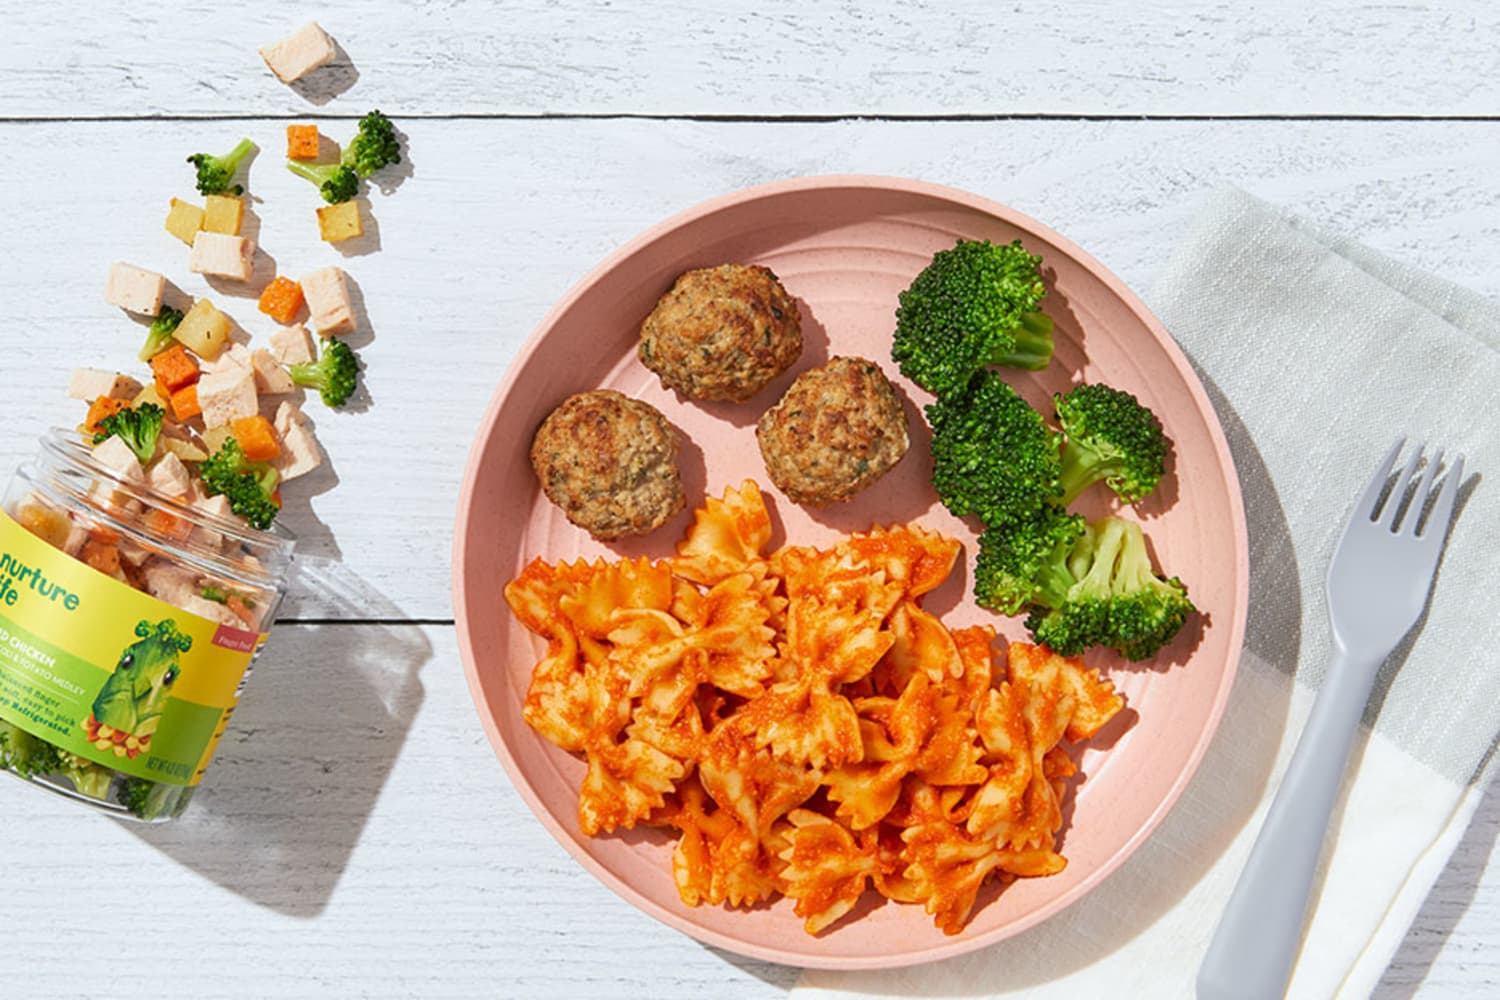 Little Spoon review: Are these pre-made kids meals good? - Reviewed